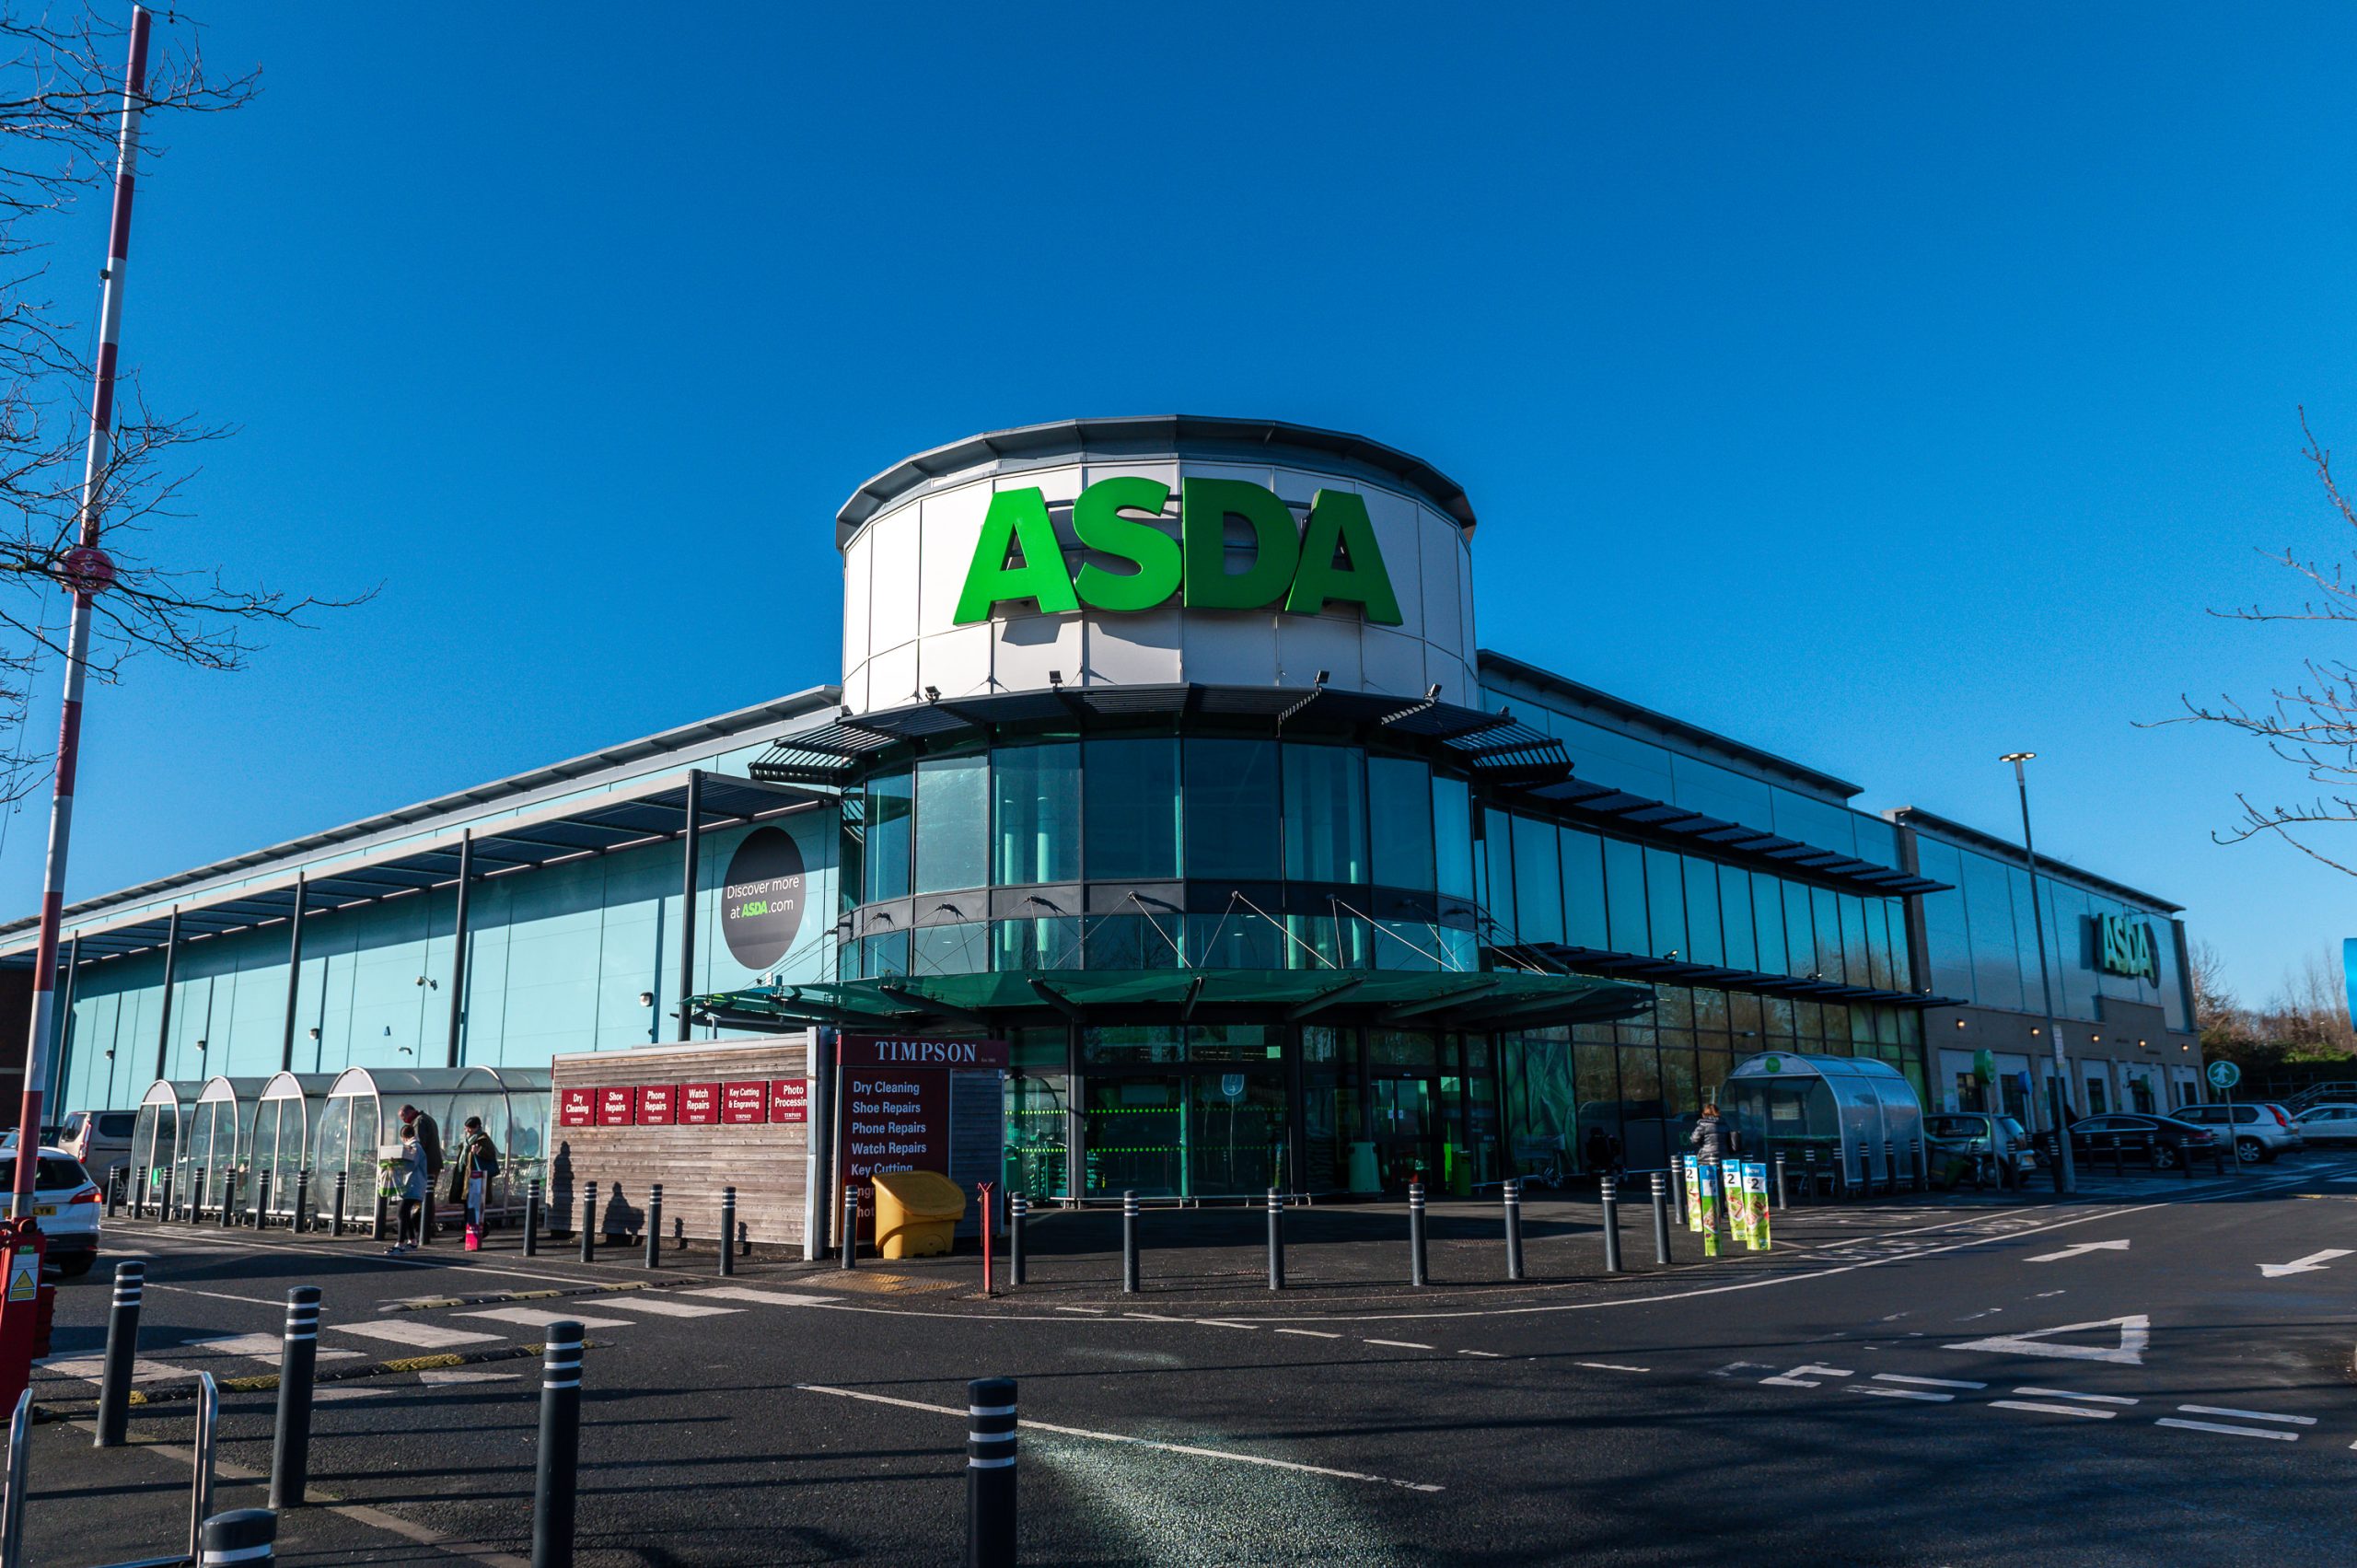 NEWS | Police searching for a woman wearing an Asda uniform following an incident in Hereford